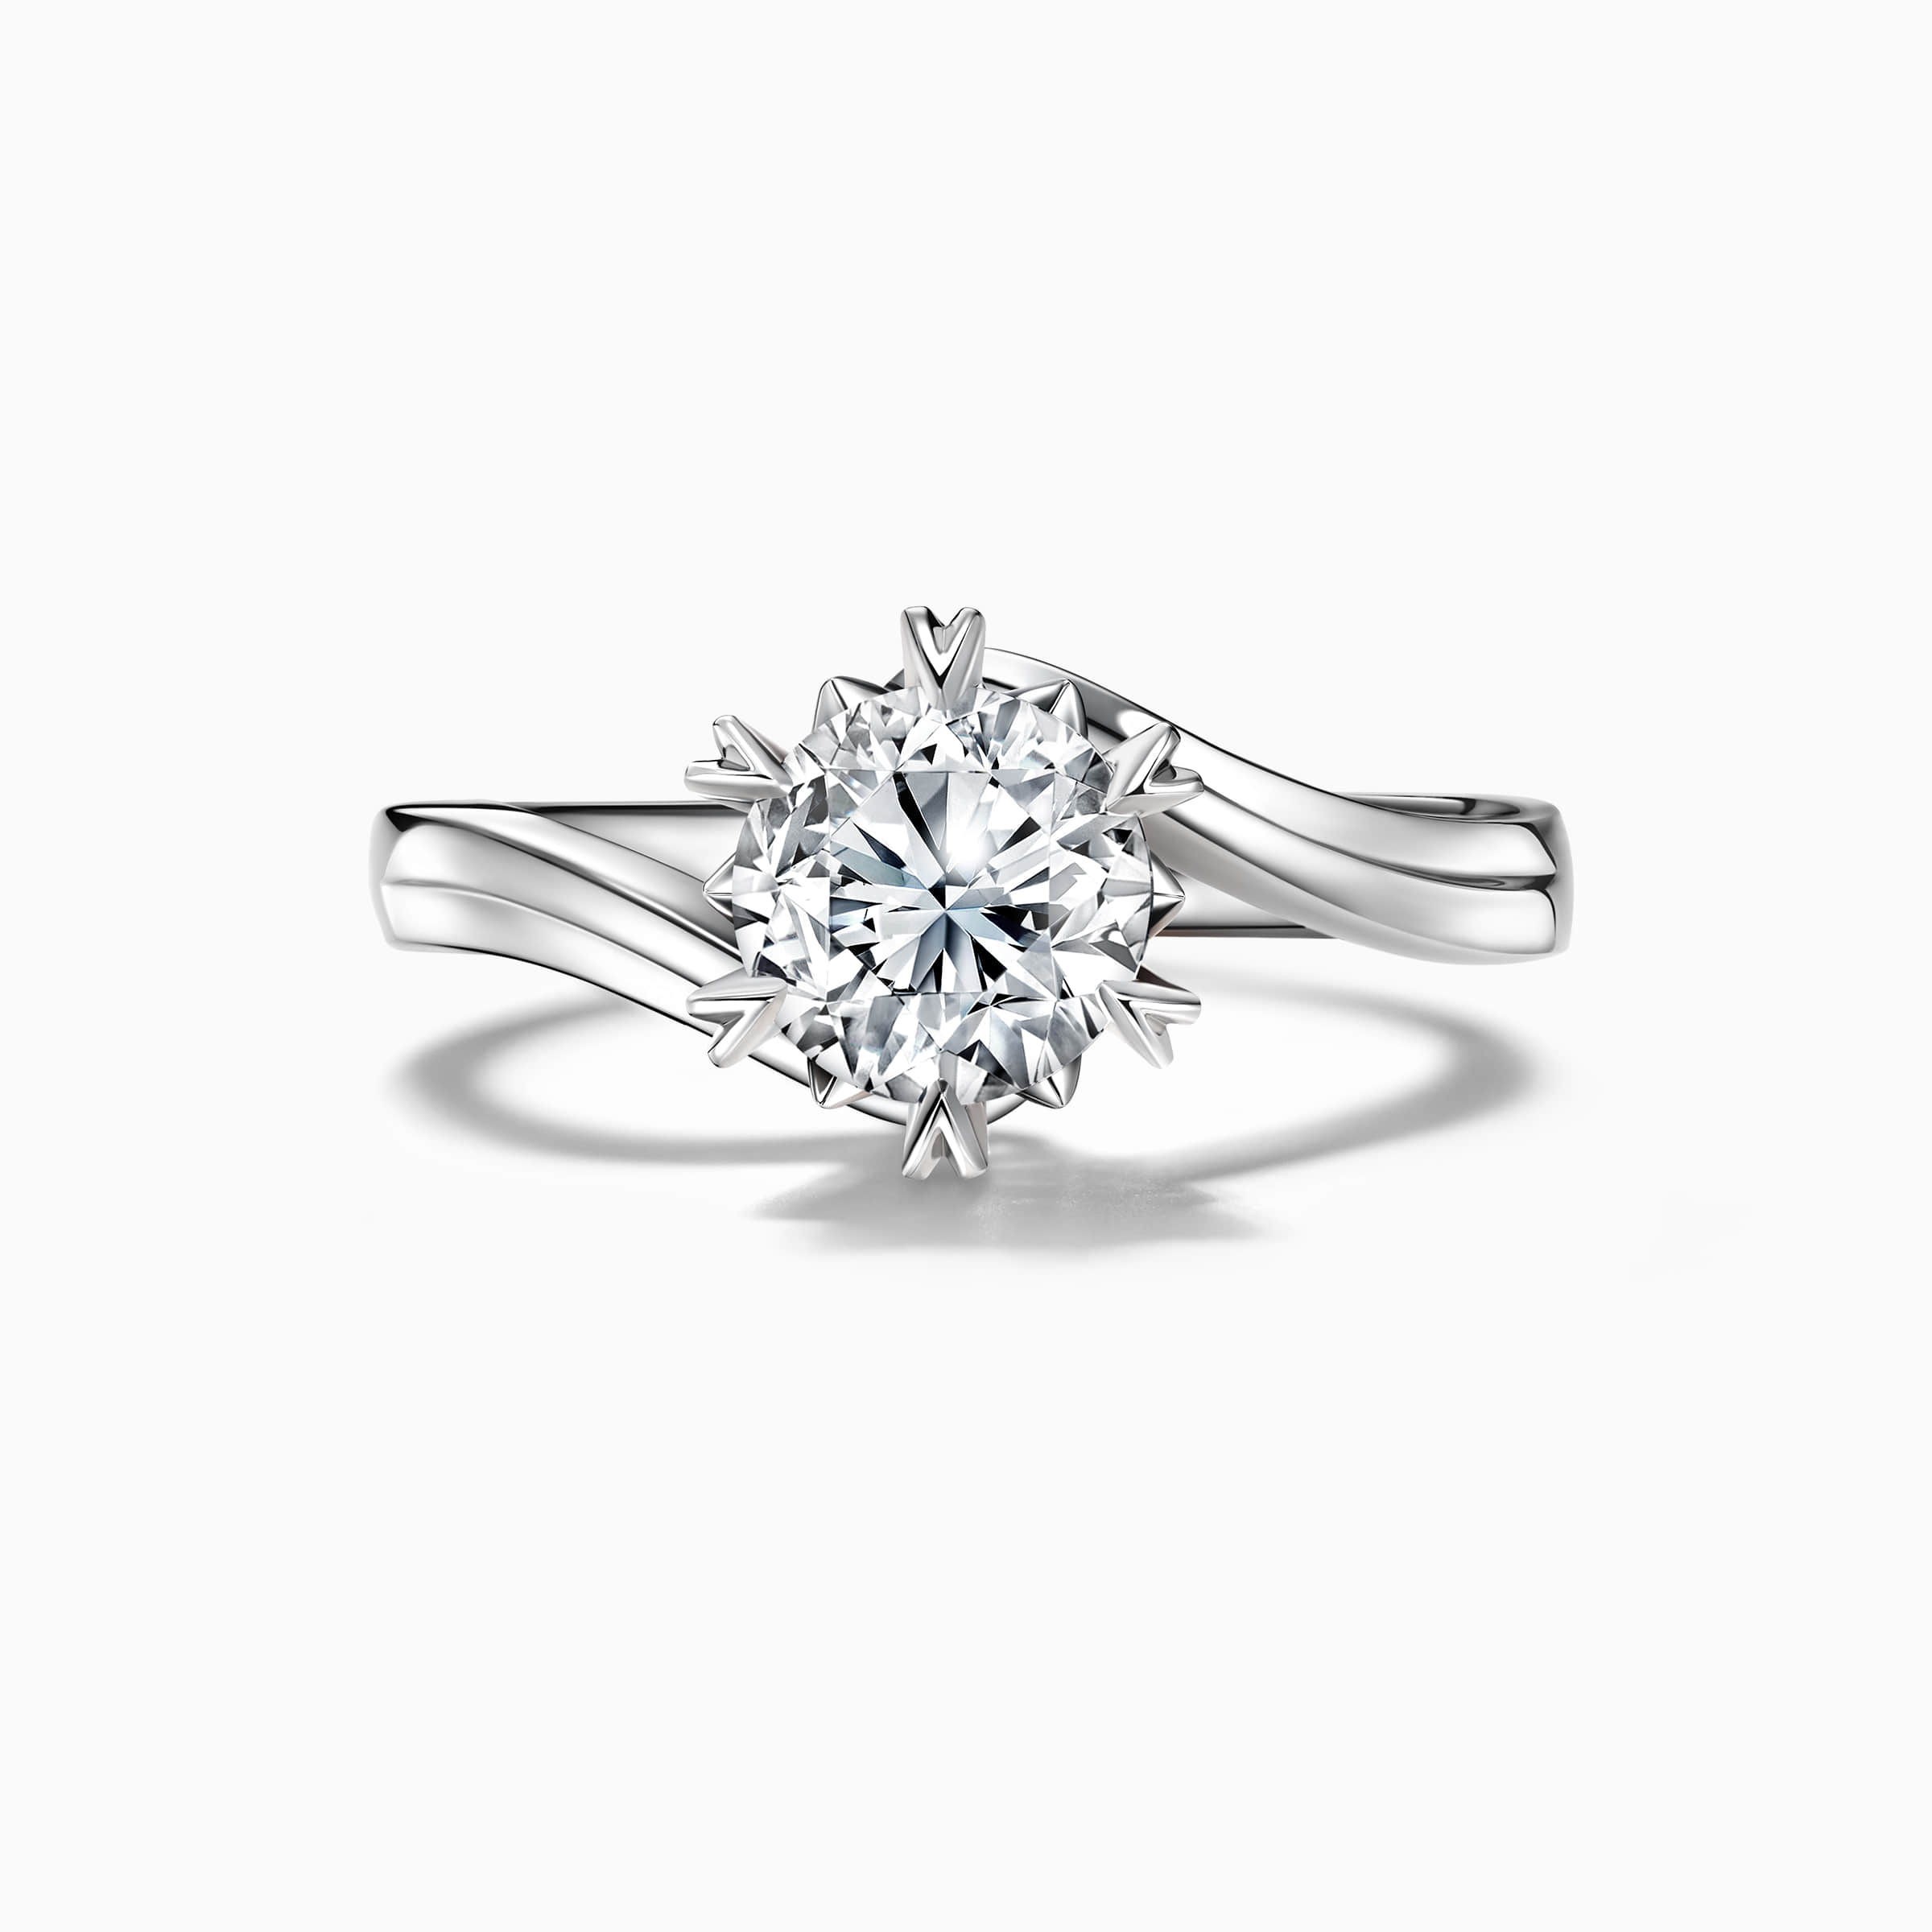 Darry Ring snowflake bypass engagement ring white gold